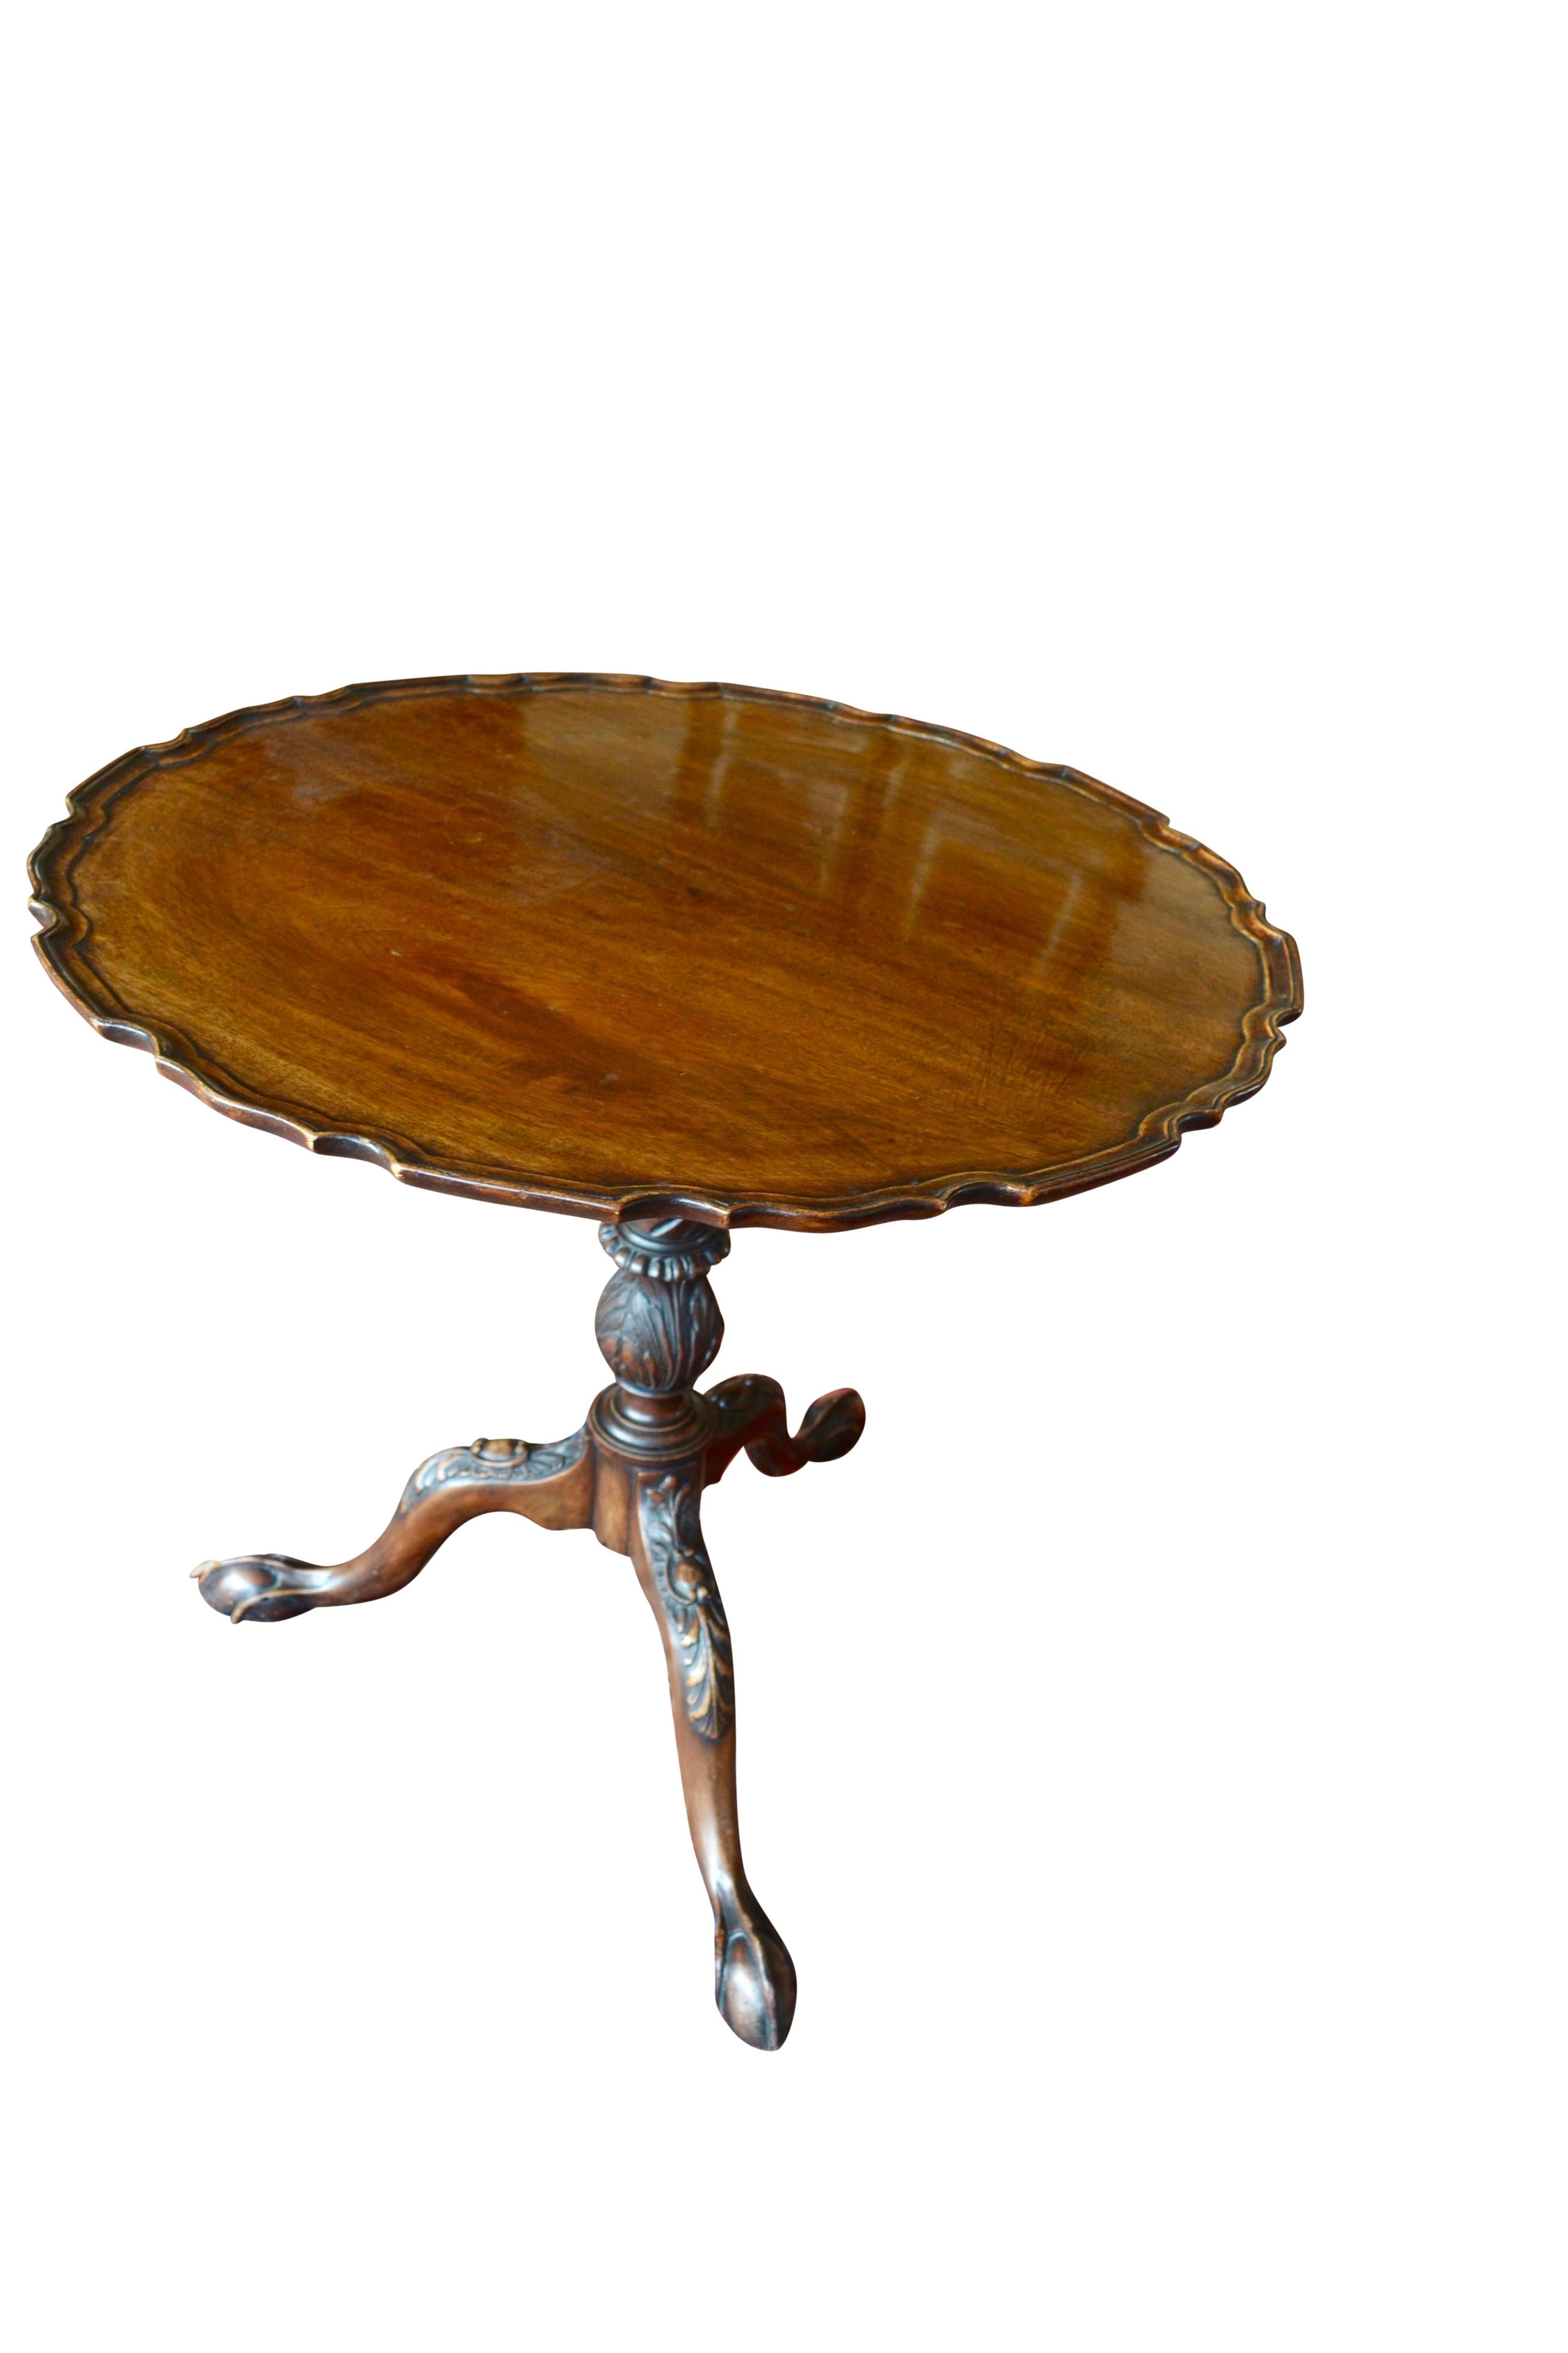 A tilt-top Chippendale style tea table in mahogany, with pie crust, dish top supported on an acanthus decorated turned pedestal, with a tripod base ending in claw and ball feet. The table in in excellent condition with strong figuring to the solid